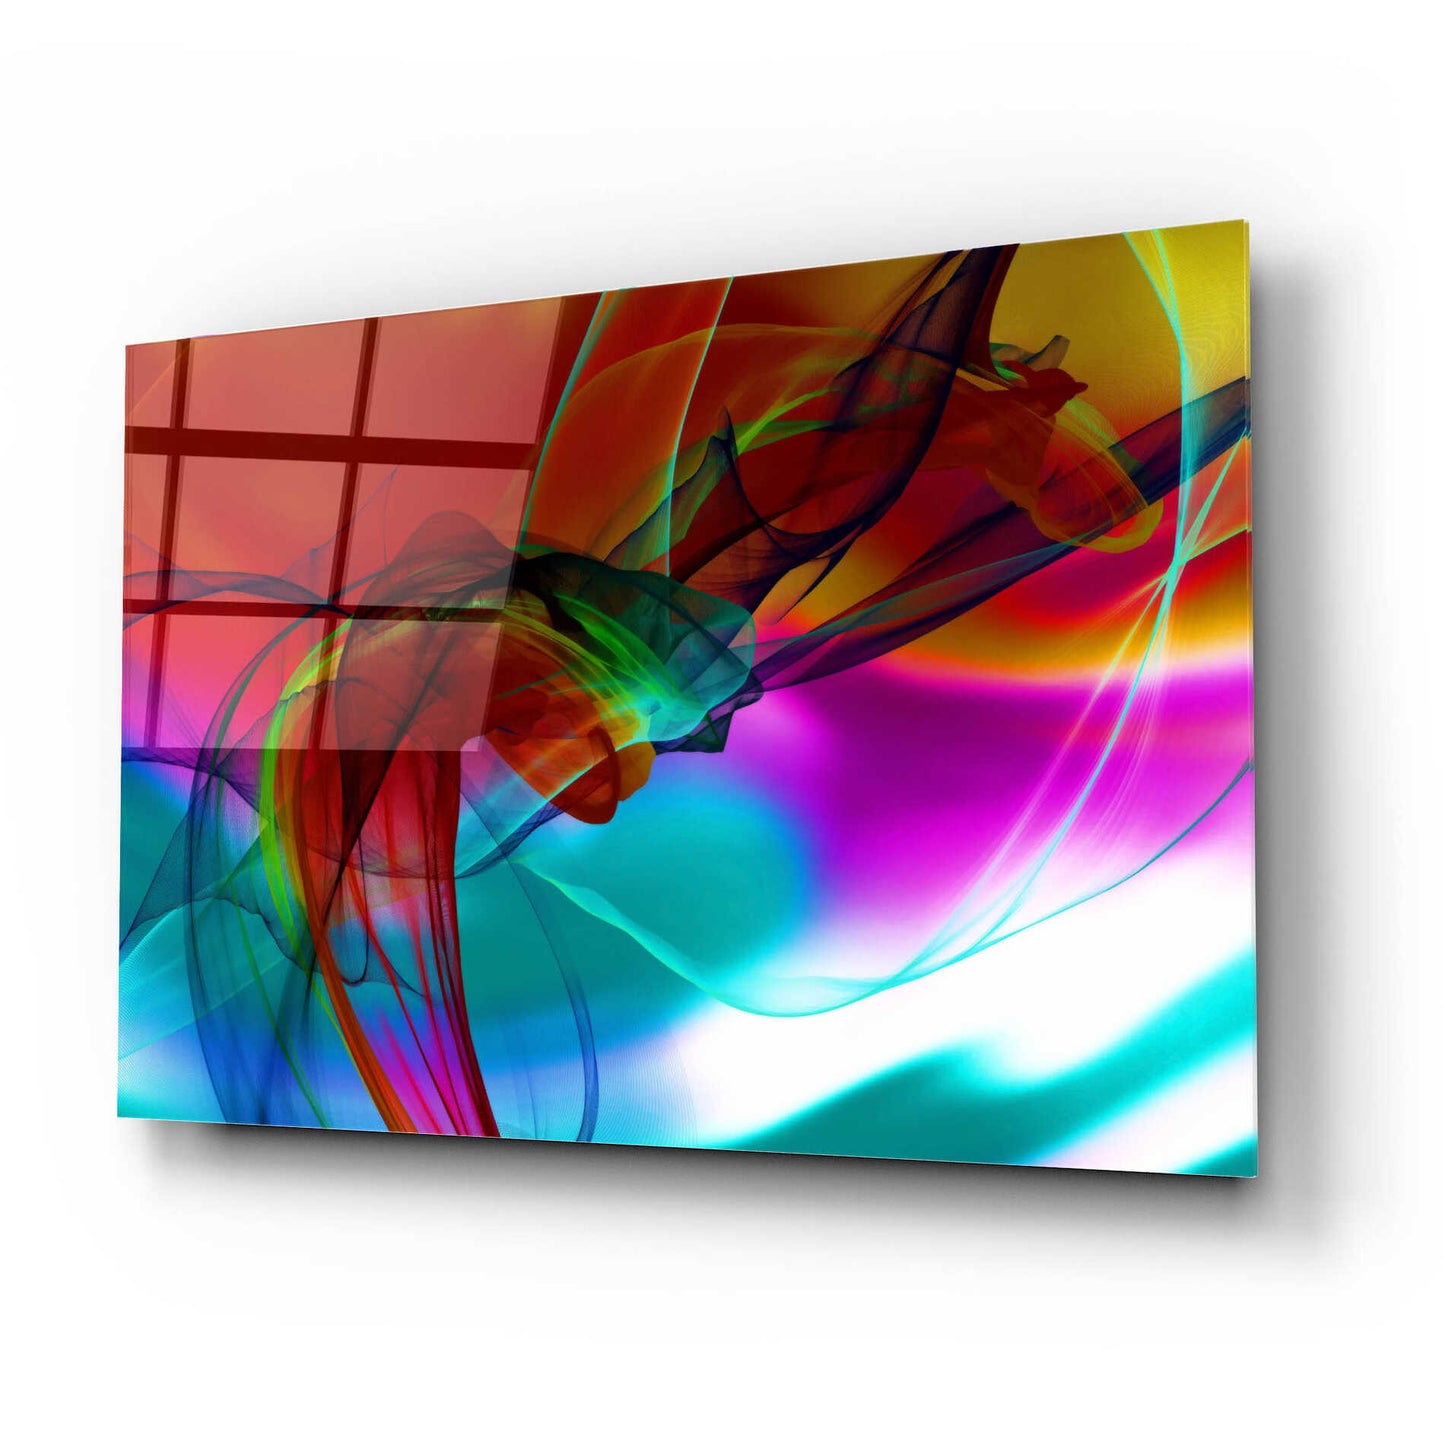 Epic Art 'Color In The Lines 16' by Irena Orlov, Acrylic Glass Wall Art,24x16